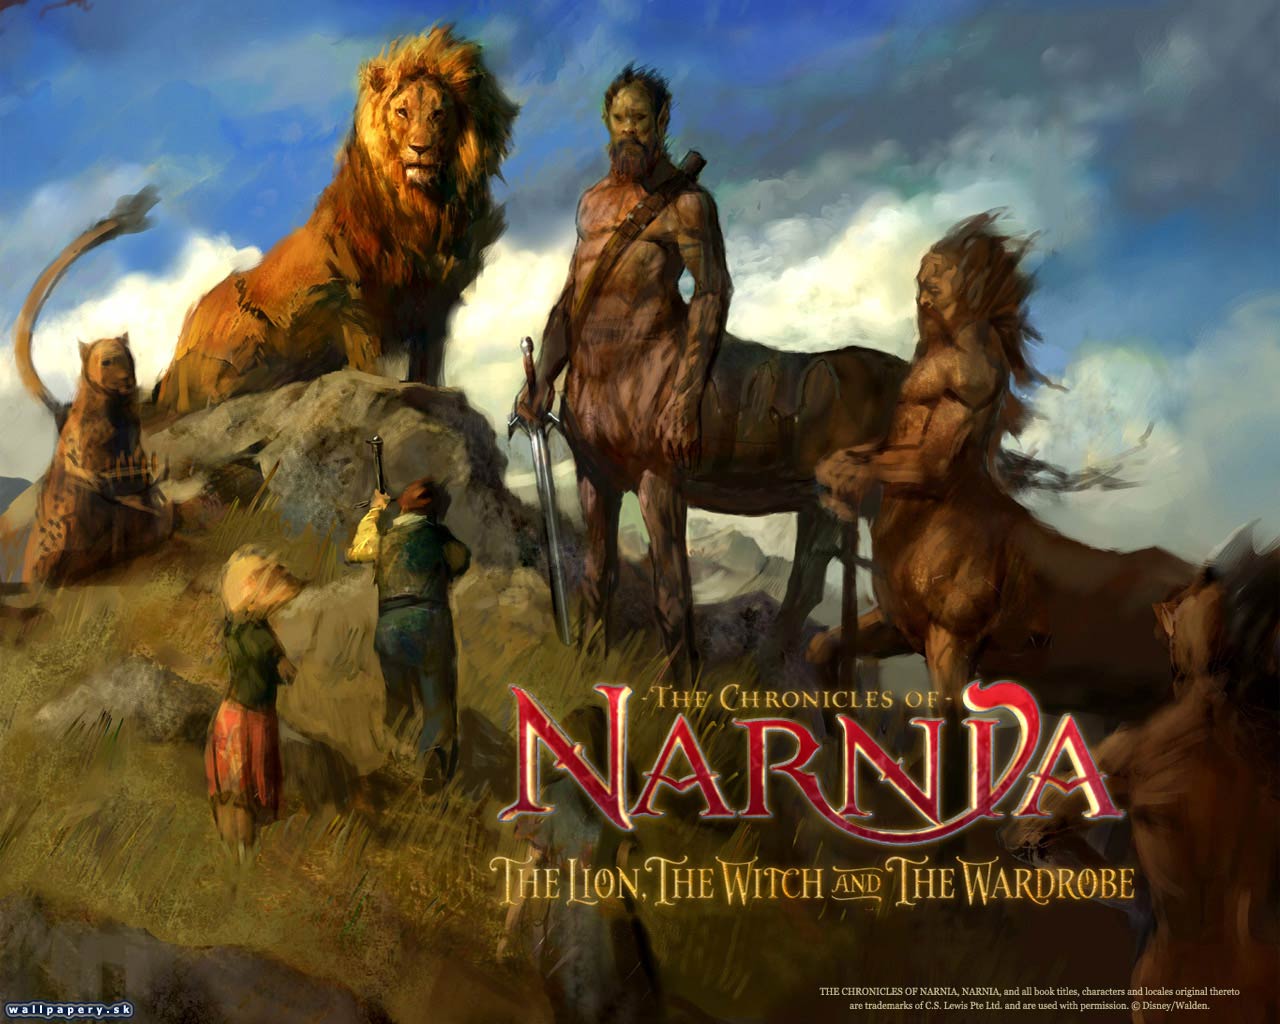 The Chronicles of Narnia: The Lion, The Witch and the Wardrobe - wallpaper 3